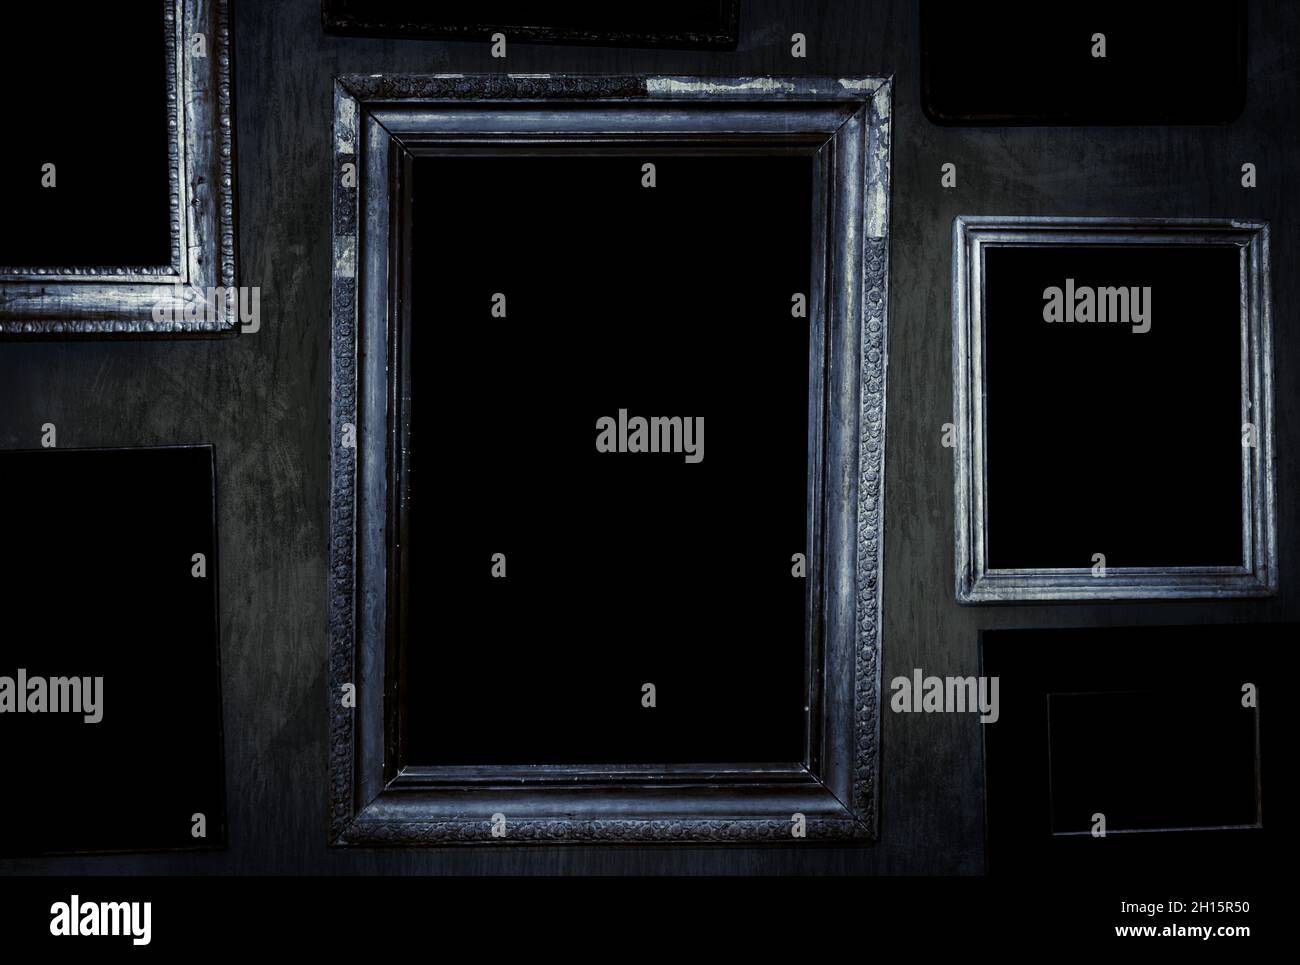 https://c8.alamy.com/comp/2H15R50/scary-horror-haunted-black-picture-frames-on-grunge-dirty-abandoned-house-wall-2H15R50.jpg